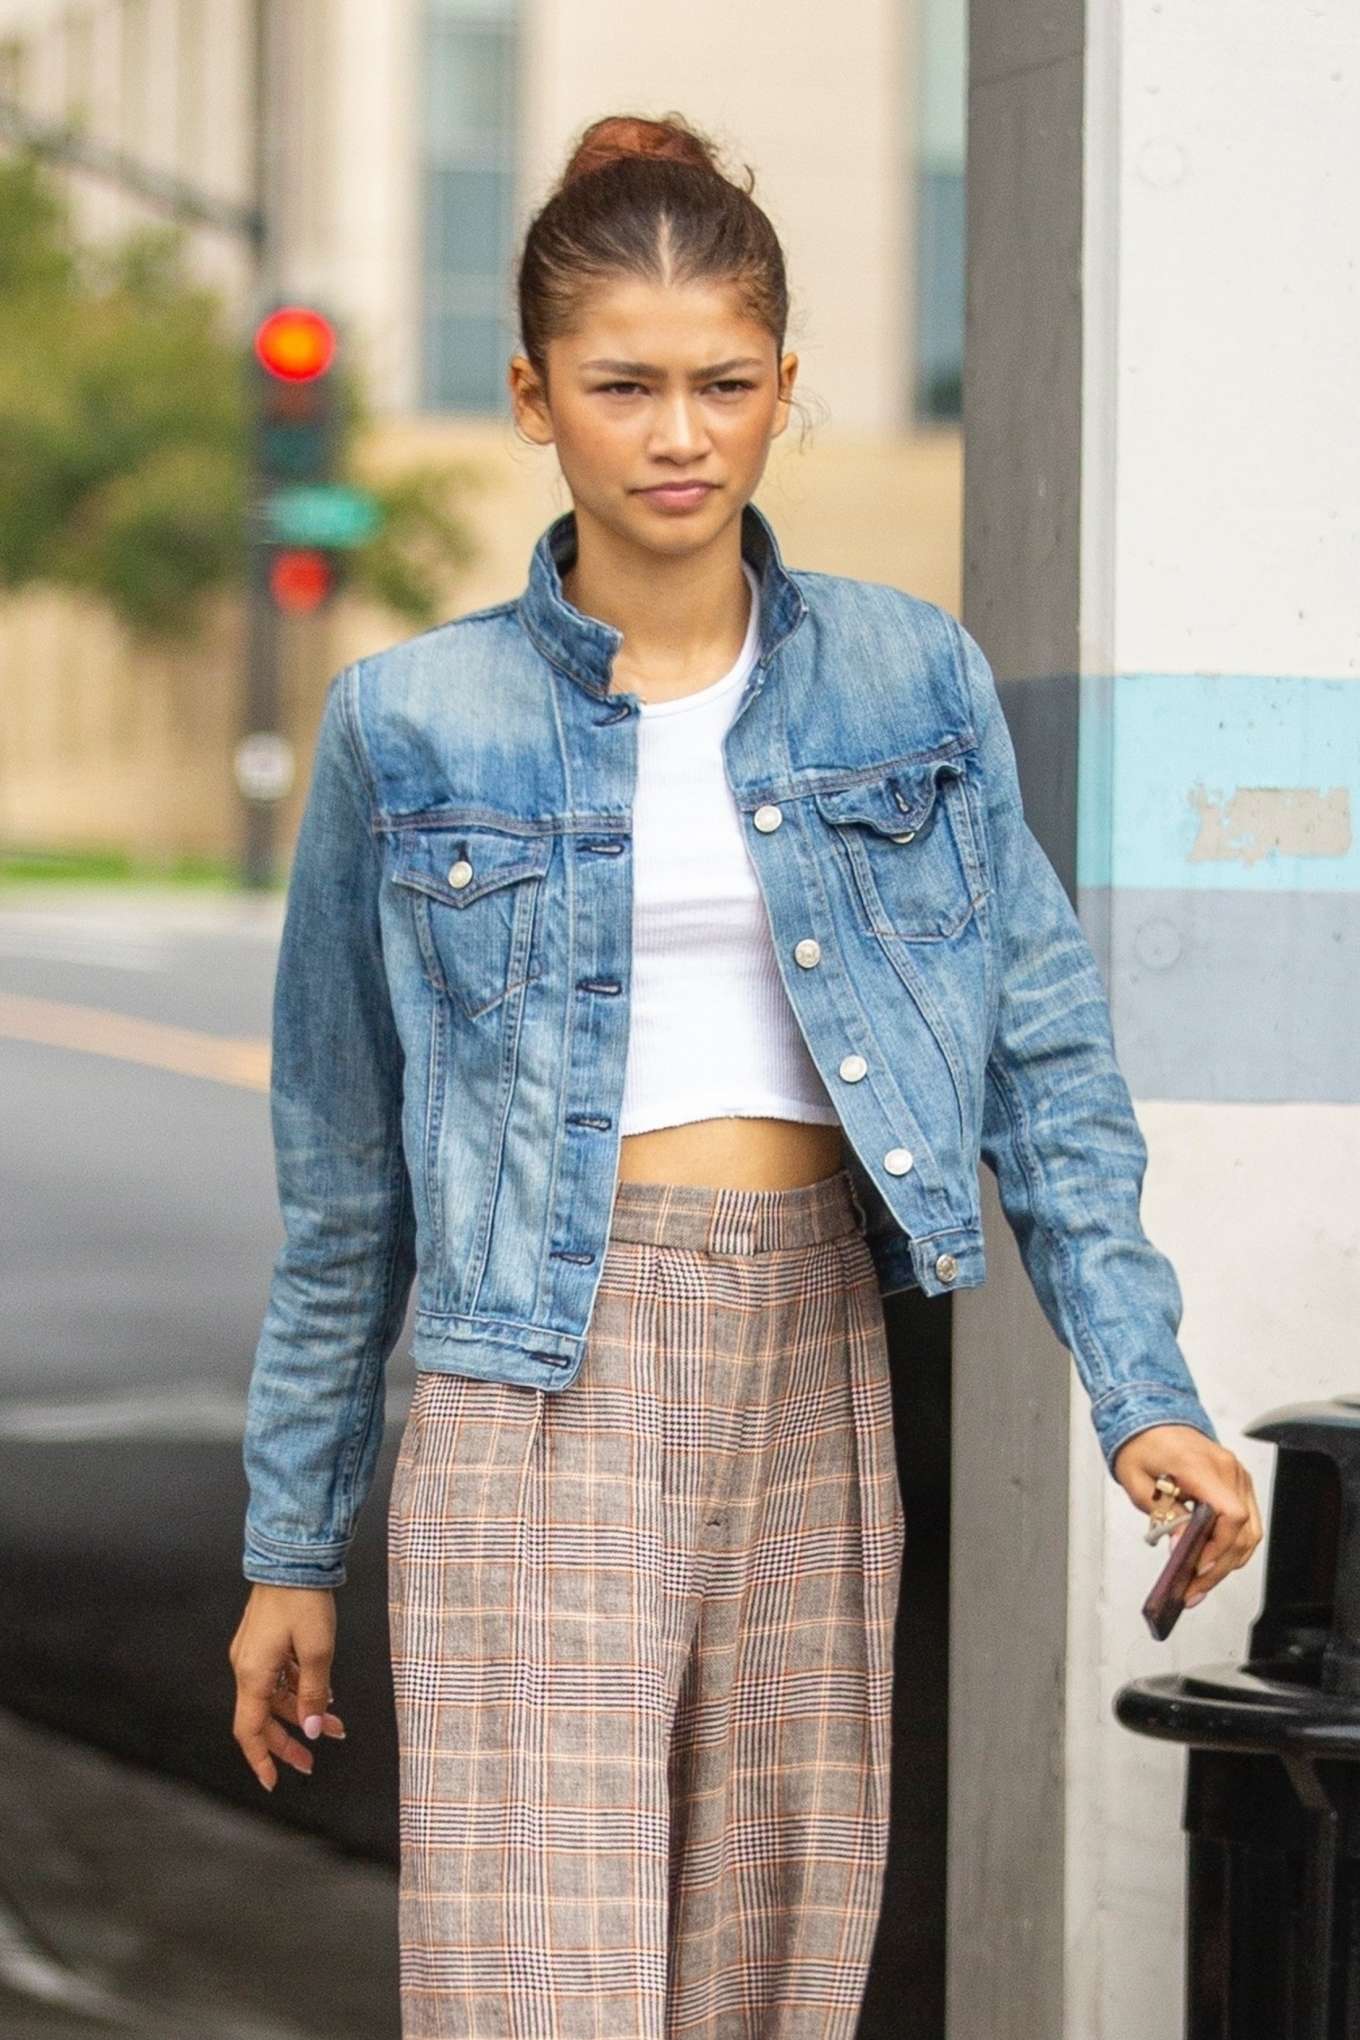 Zendaya â€“ Has Lunch With Her Brother Austin At The Granville Restaurant In Burbank